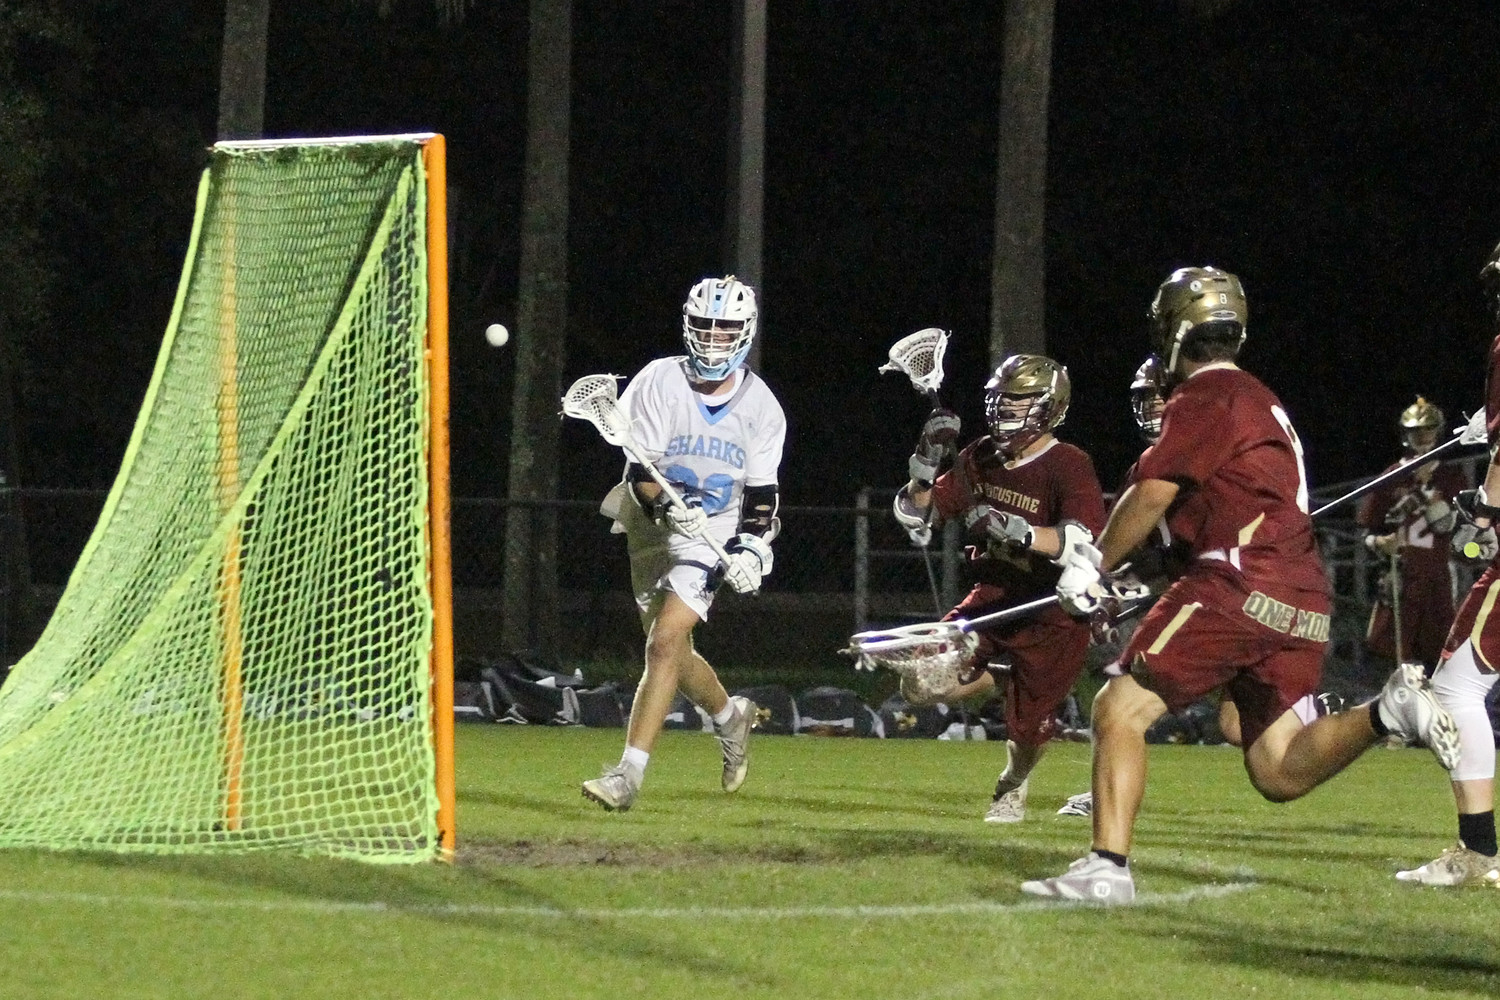 Carter Parlette of Ponte Vedra shoots into an open net as the St. Augustine goalie is caught out of the crease.